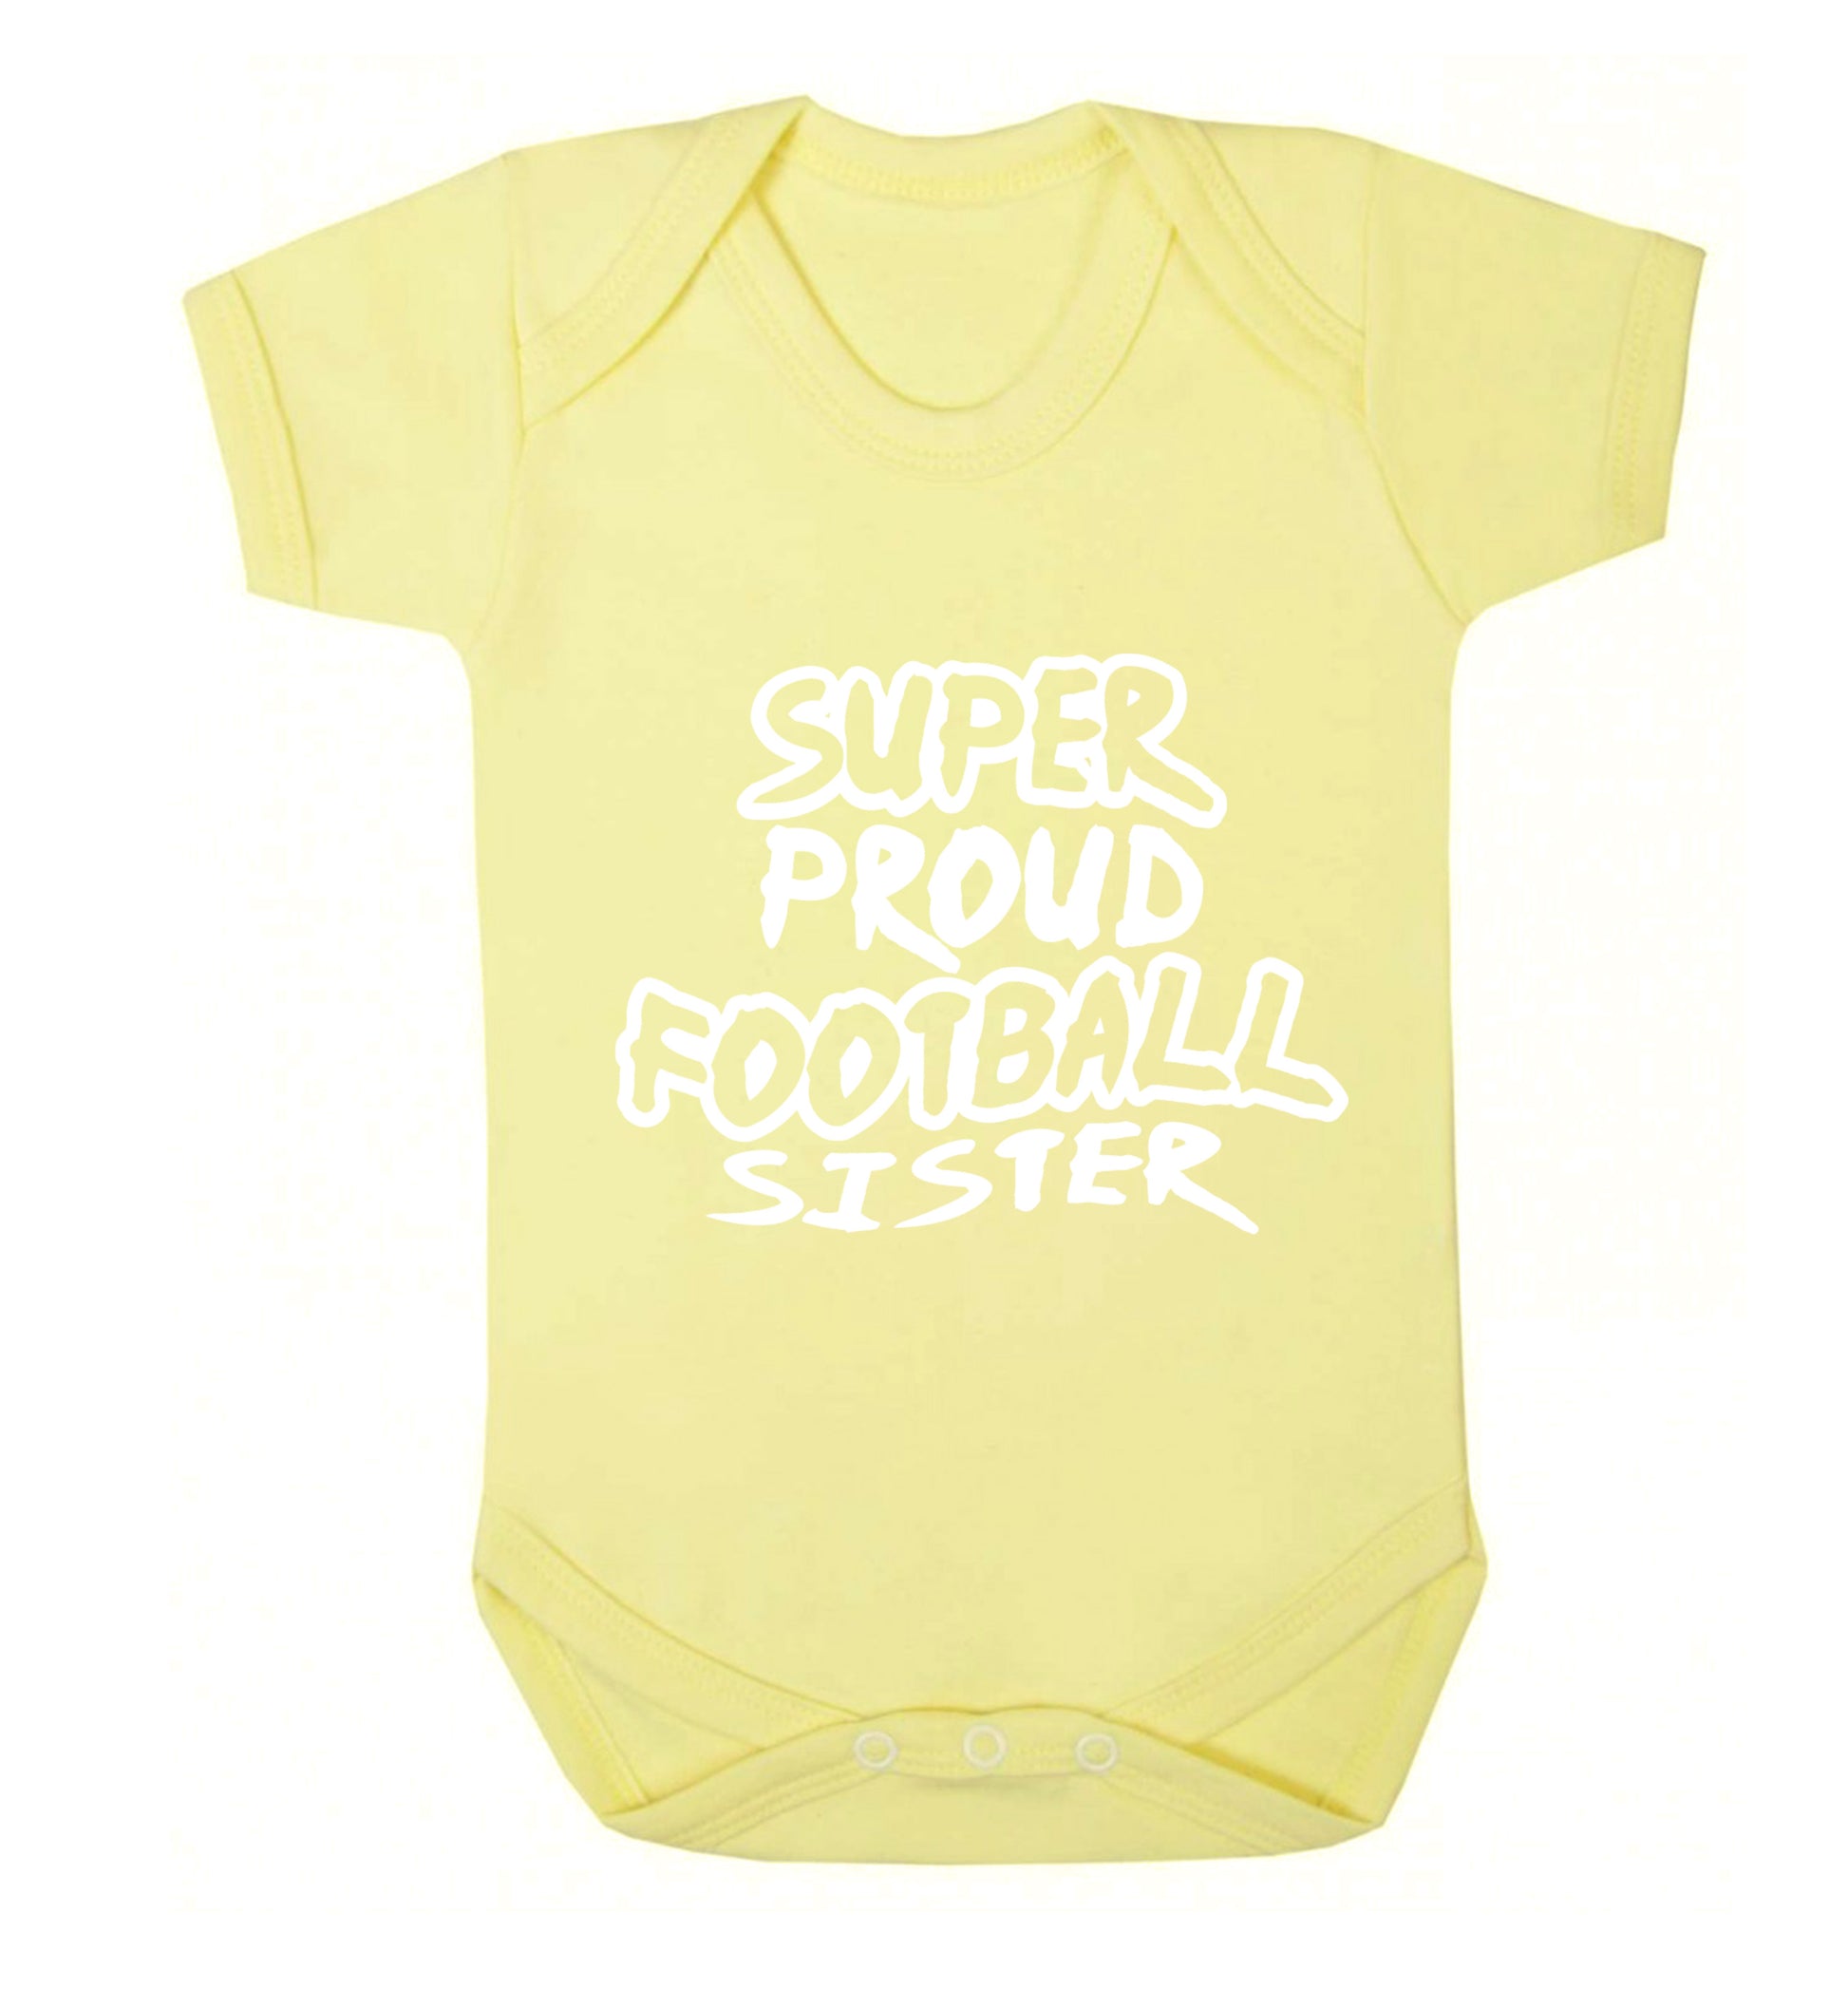 Super proud football sister Baby Vest pale yellow 18-24 months